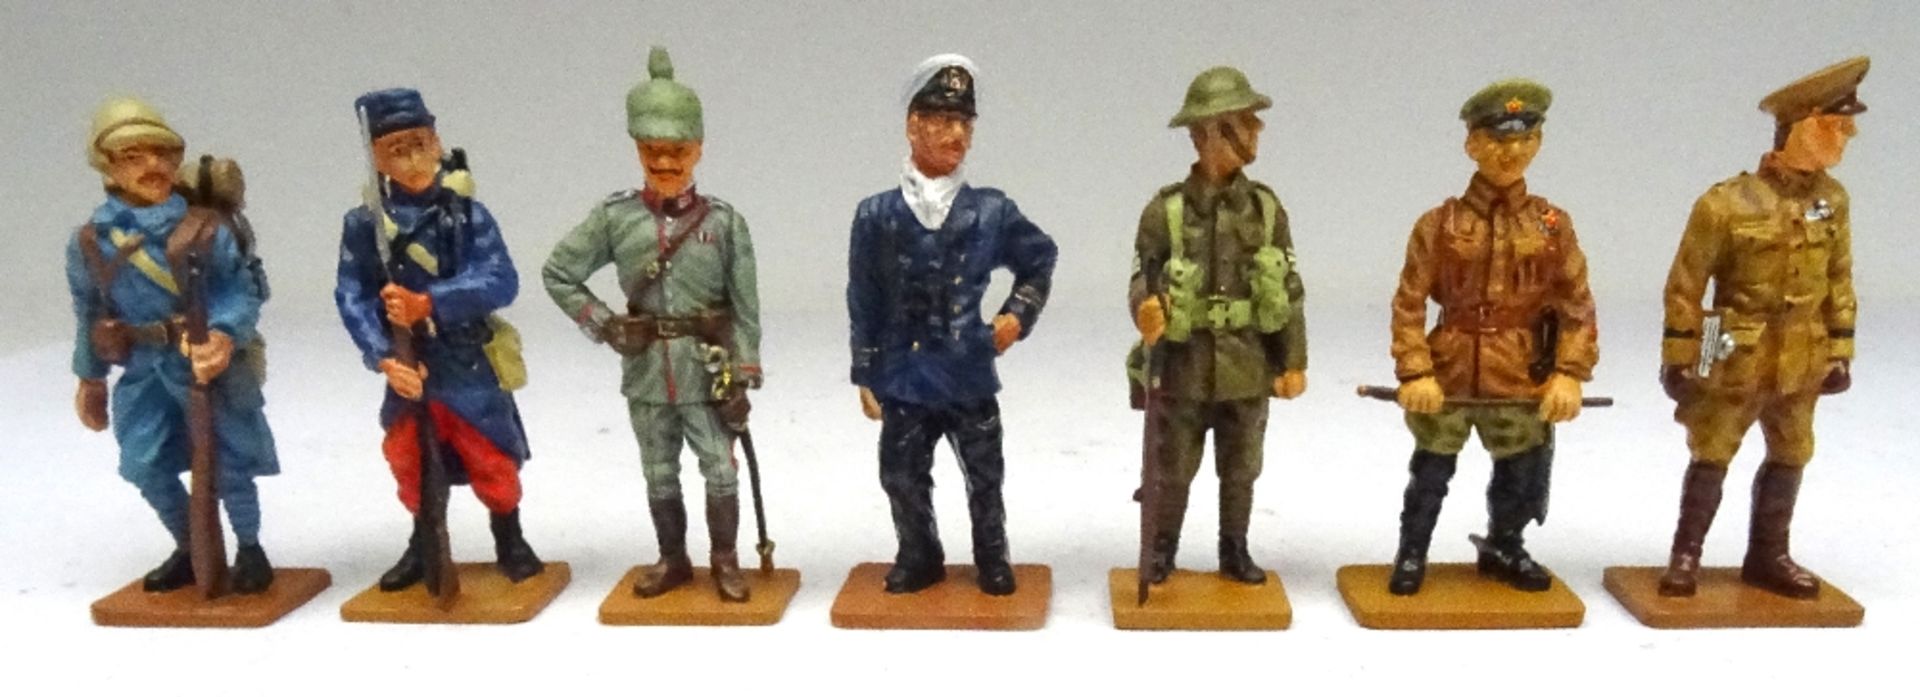 Lawrence of Arabia and other WWI figures - Image 4 of 13